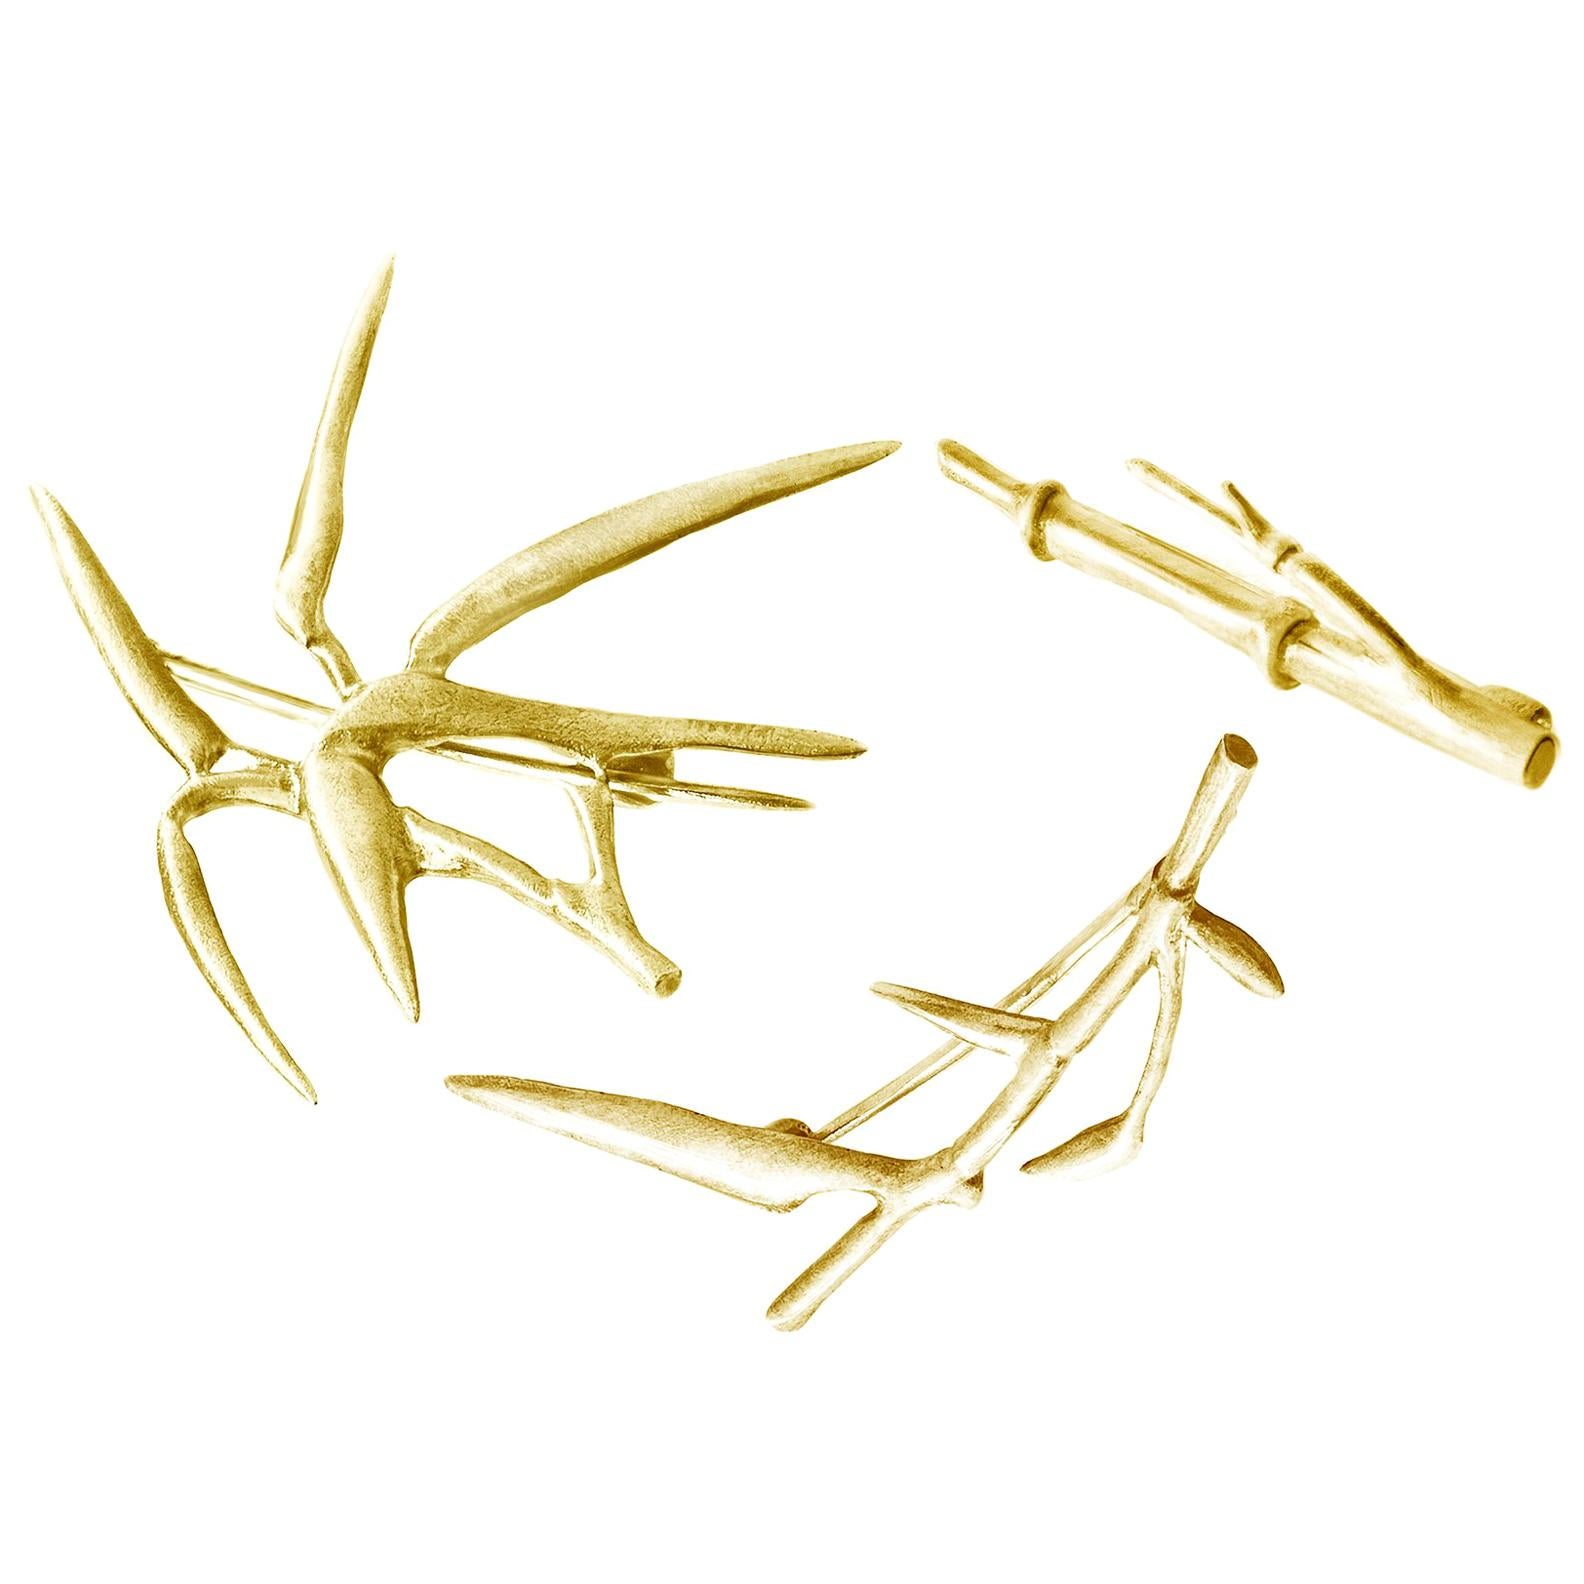 Featured in Vogue 14 Karat Yellow Gold Bamboo Brooch Triptych by the Artist